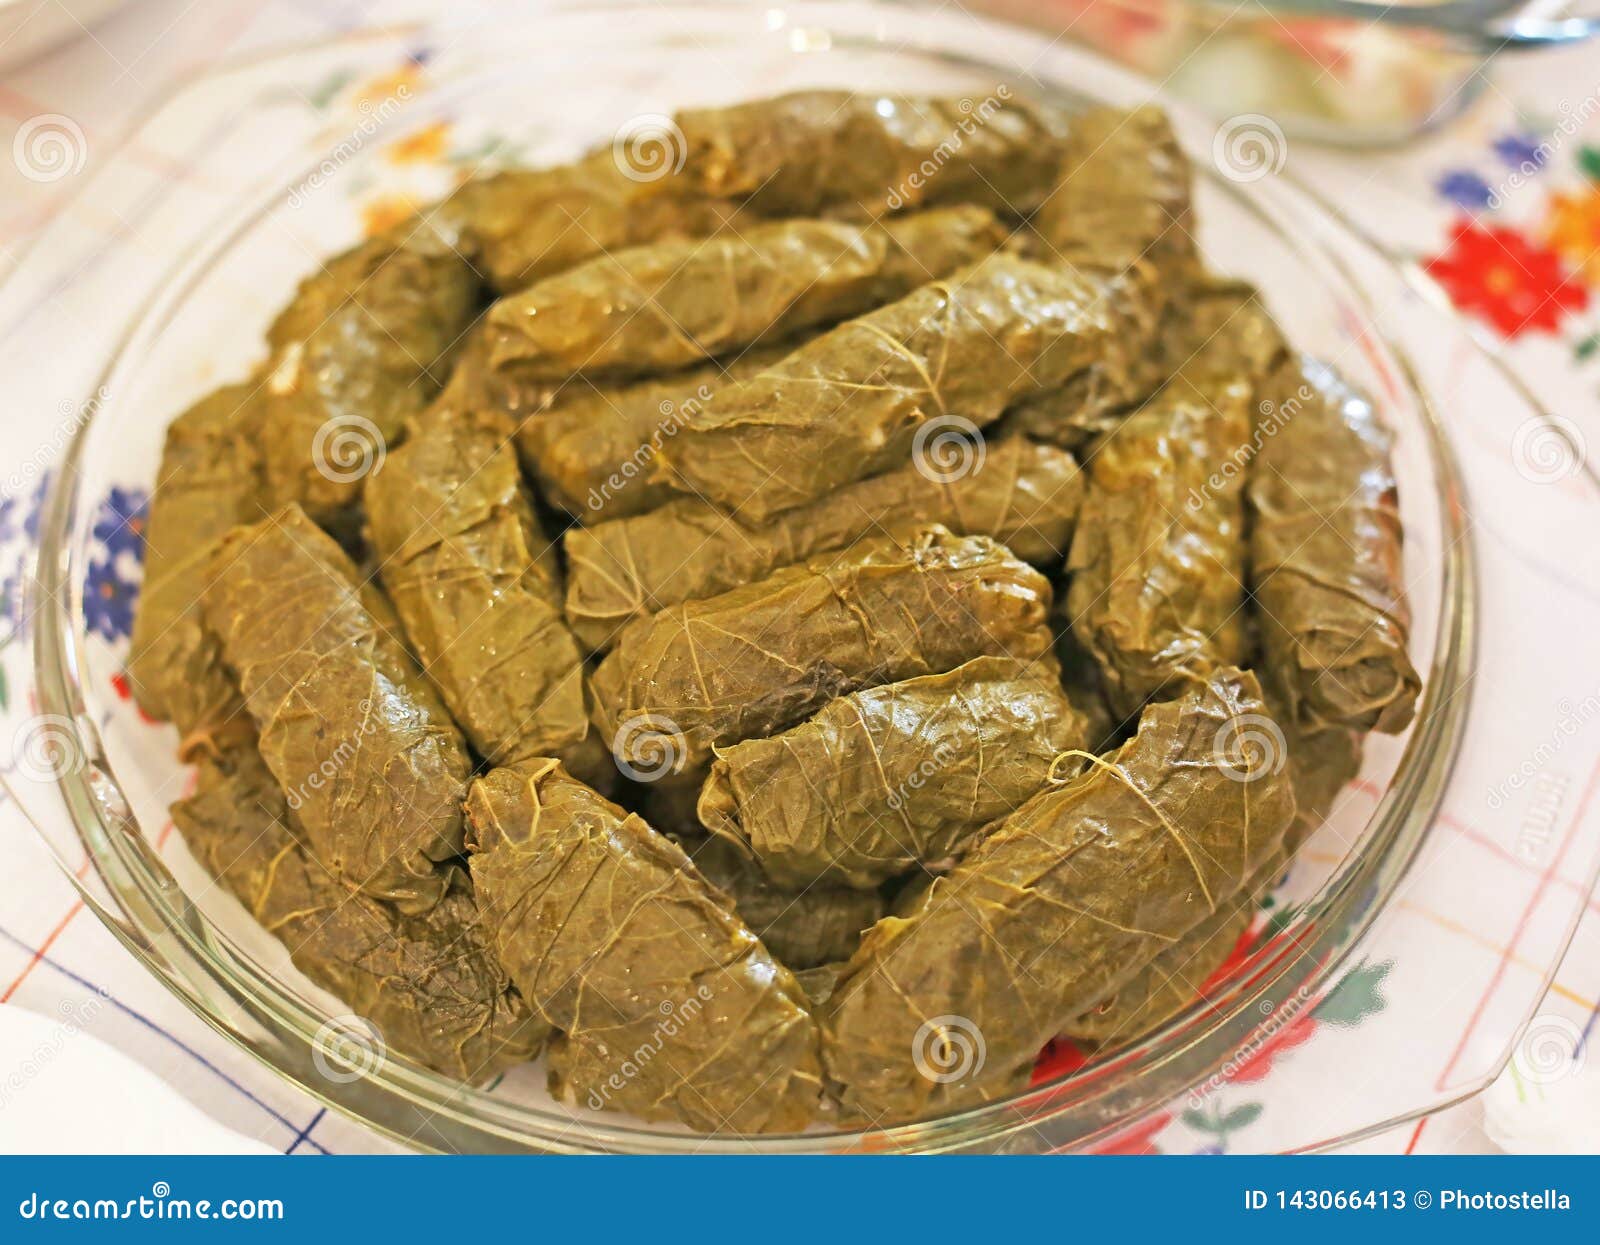 rice wrapped in grape leaves - traditional greek food called dolmadakia